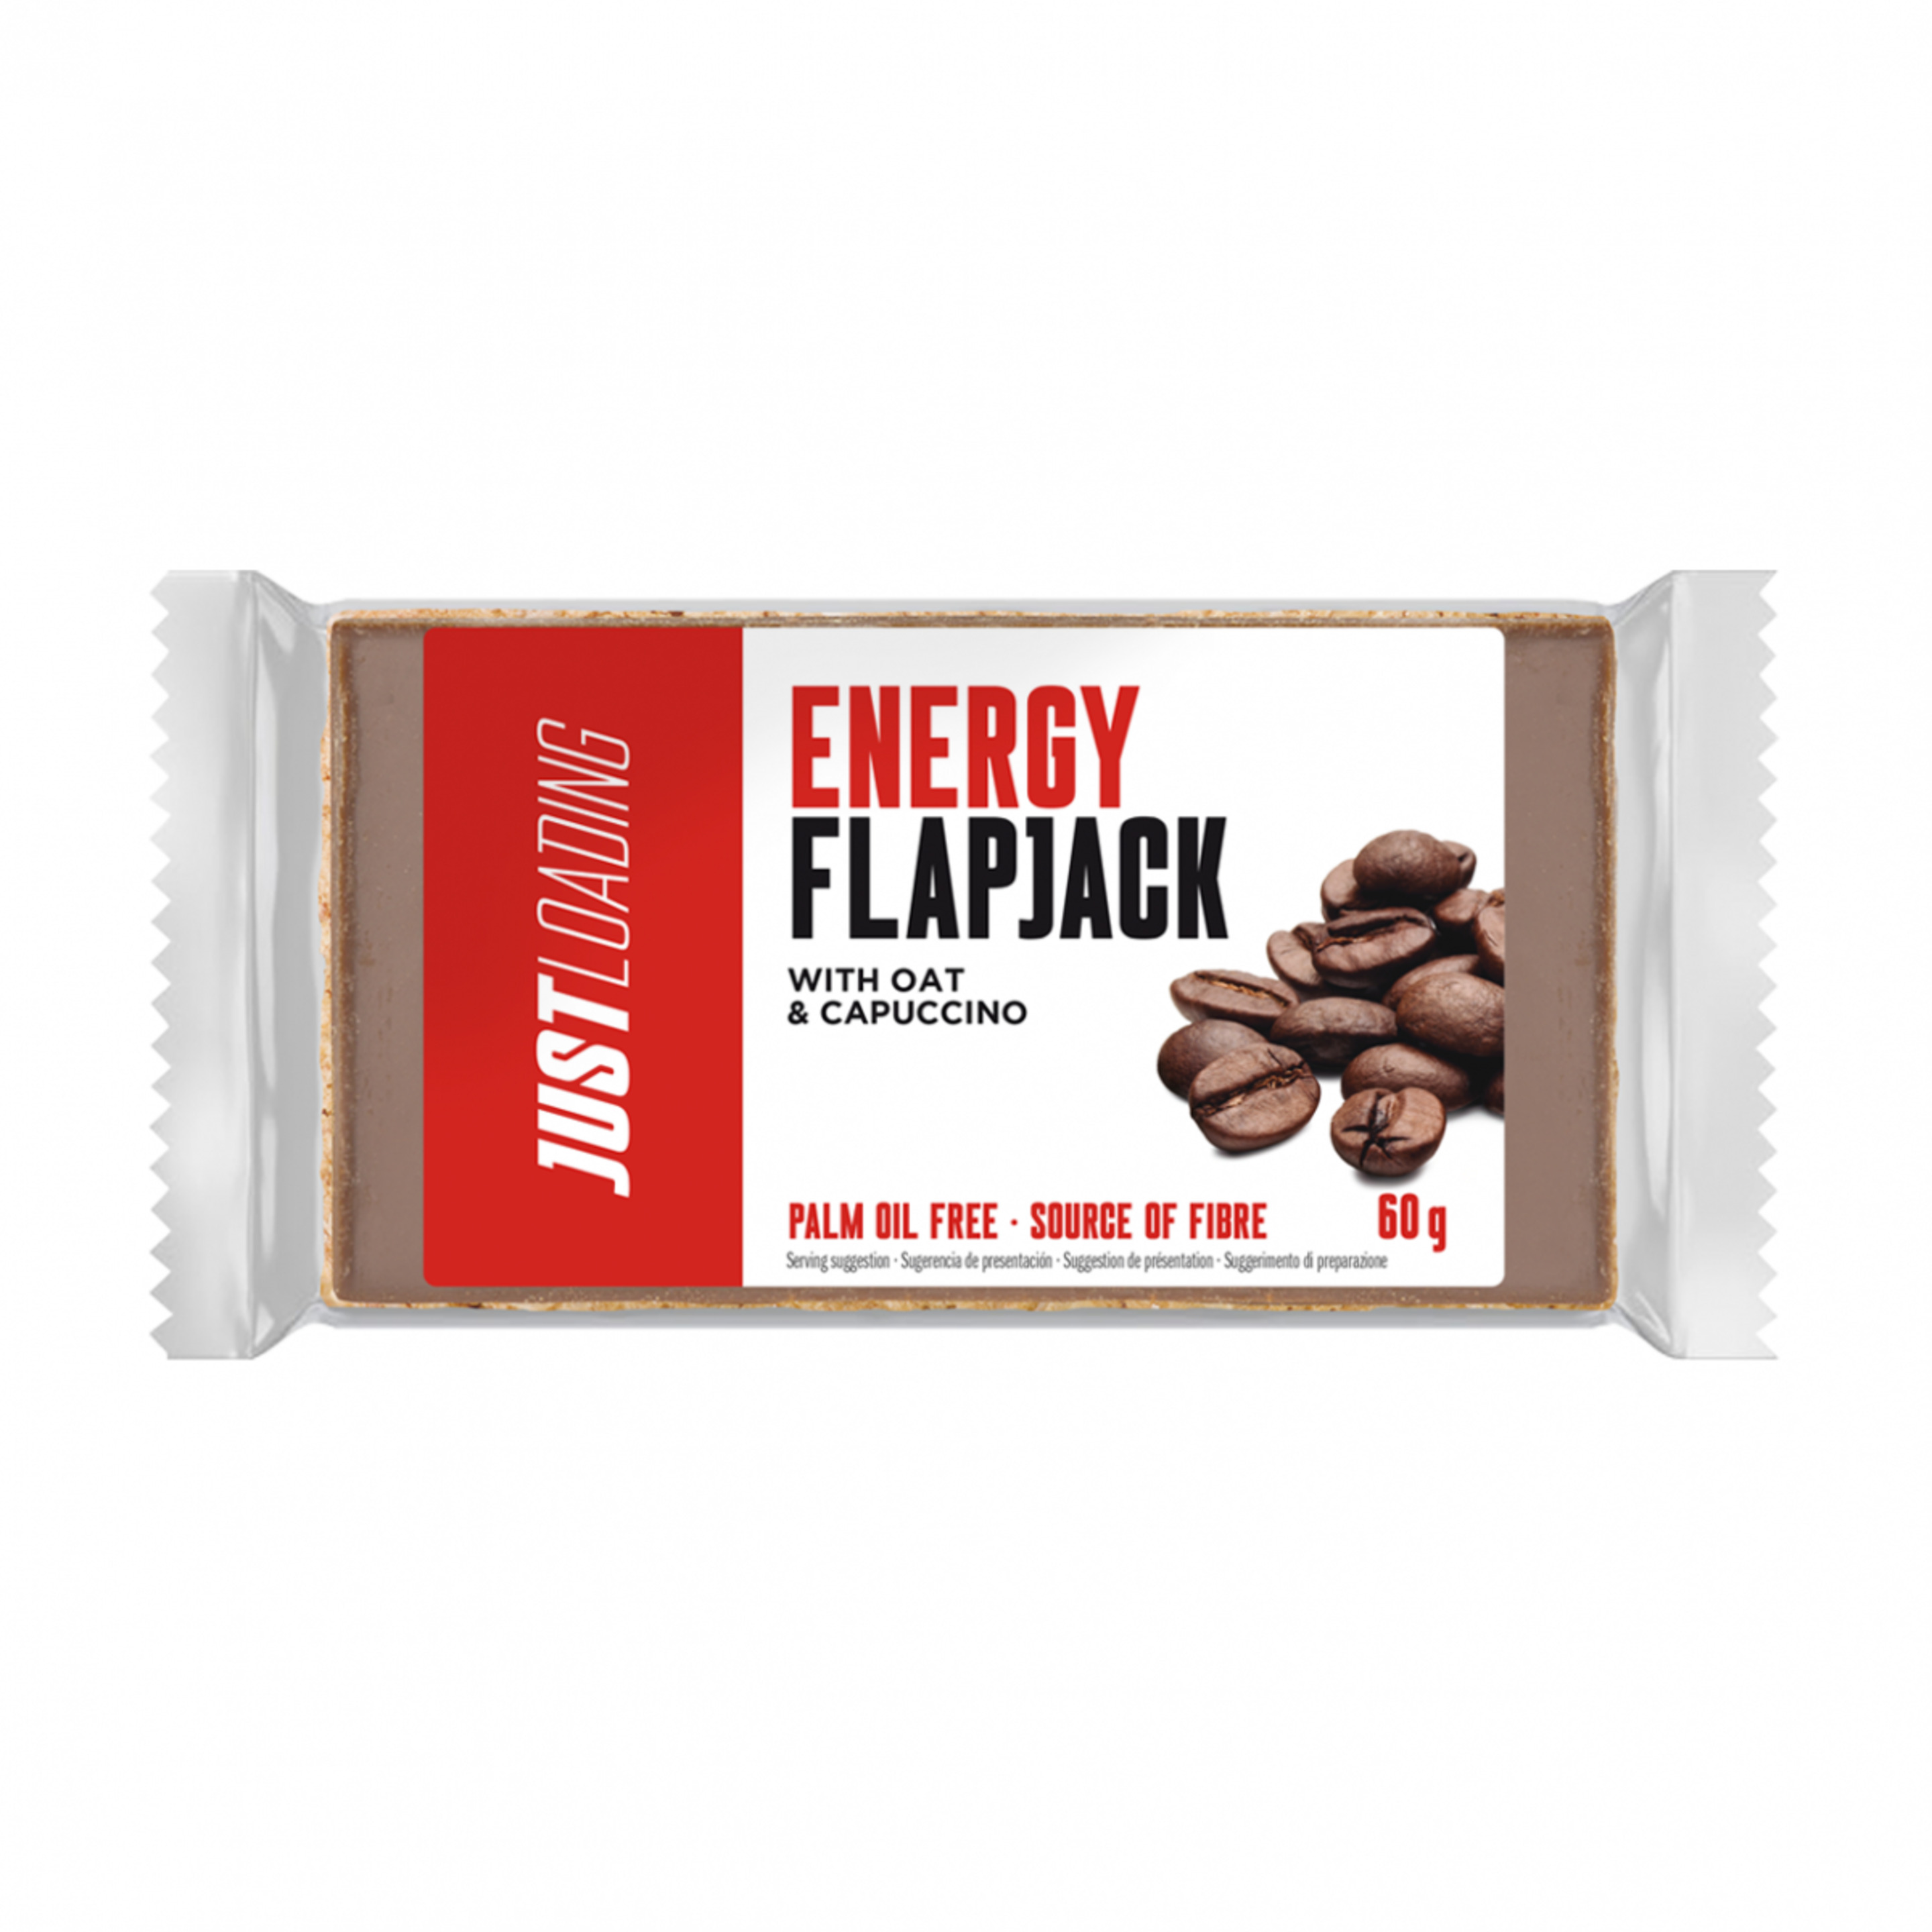 Flapjack Energético Chocolate Y Capuccino Justloading